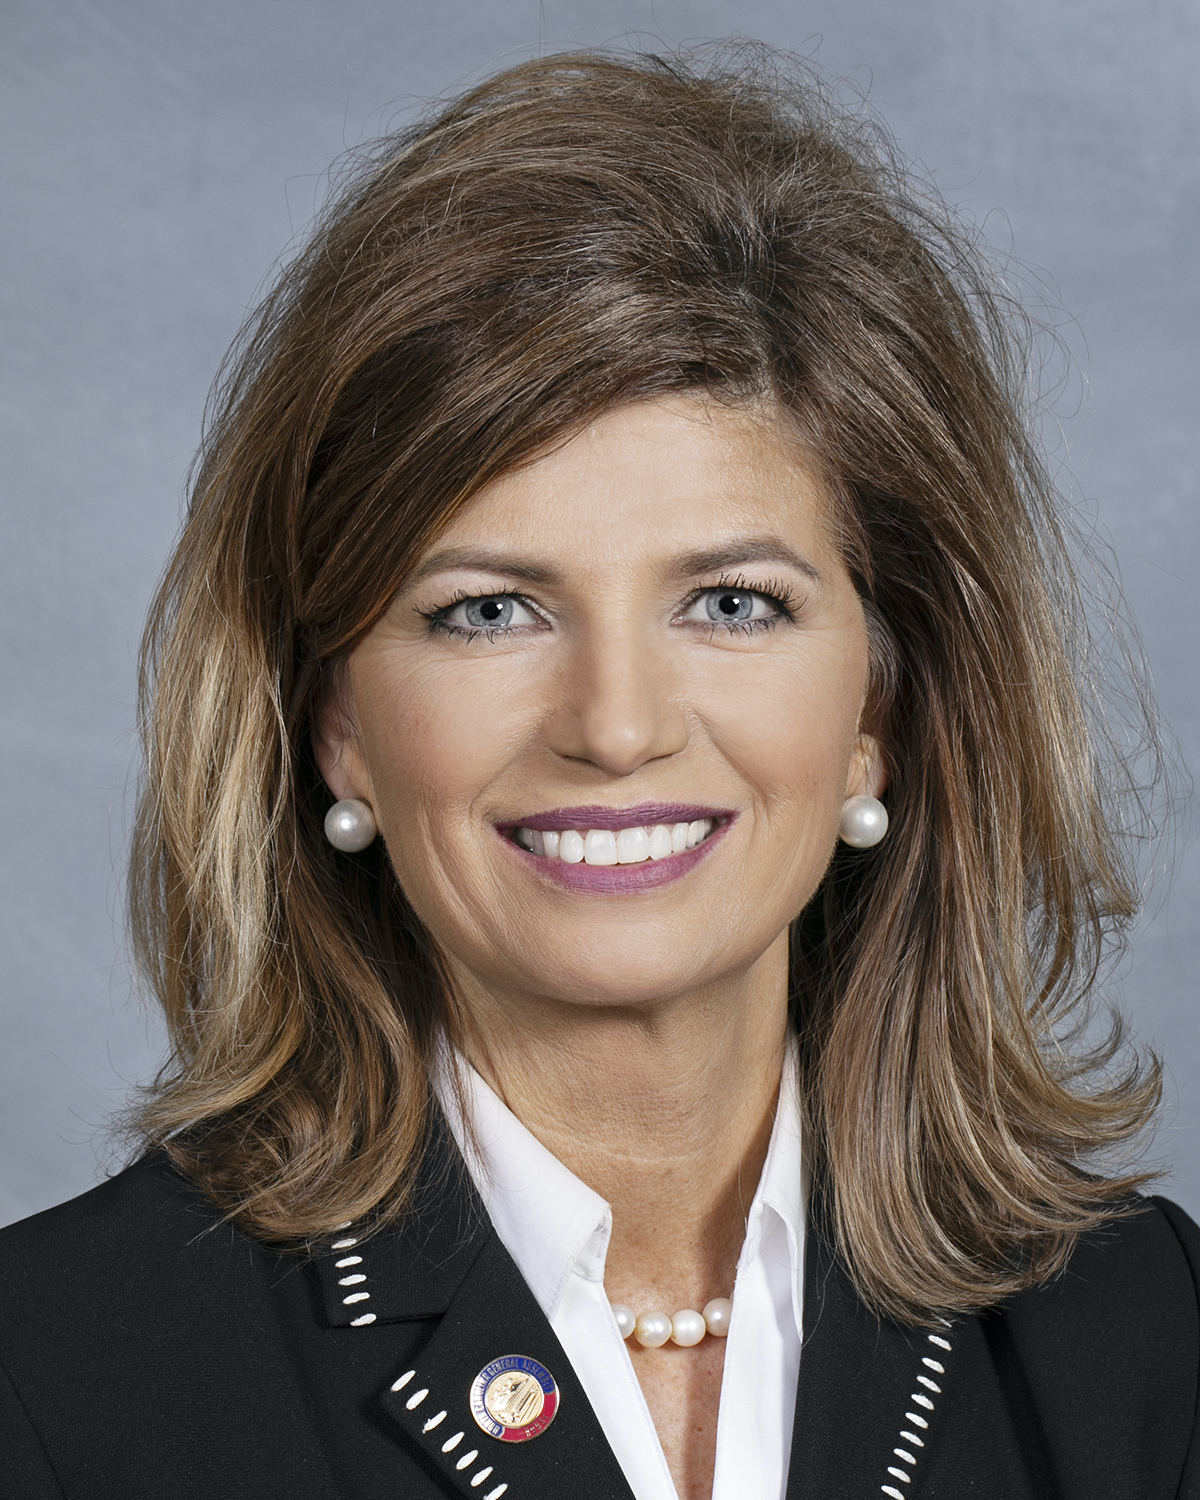 Barnes in 2018 as a member of the state house